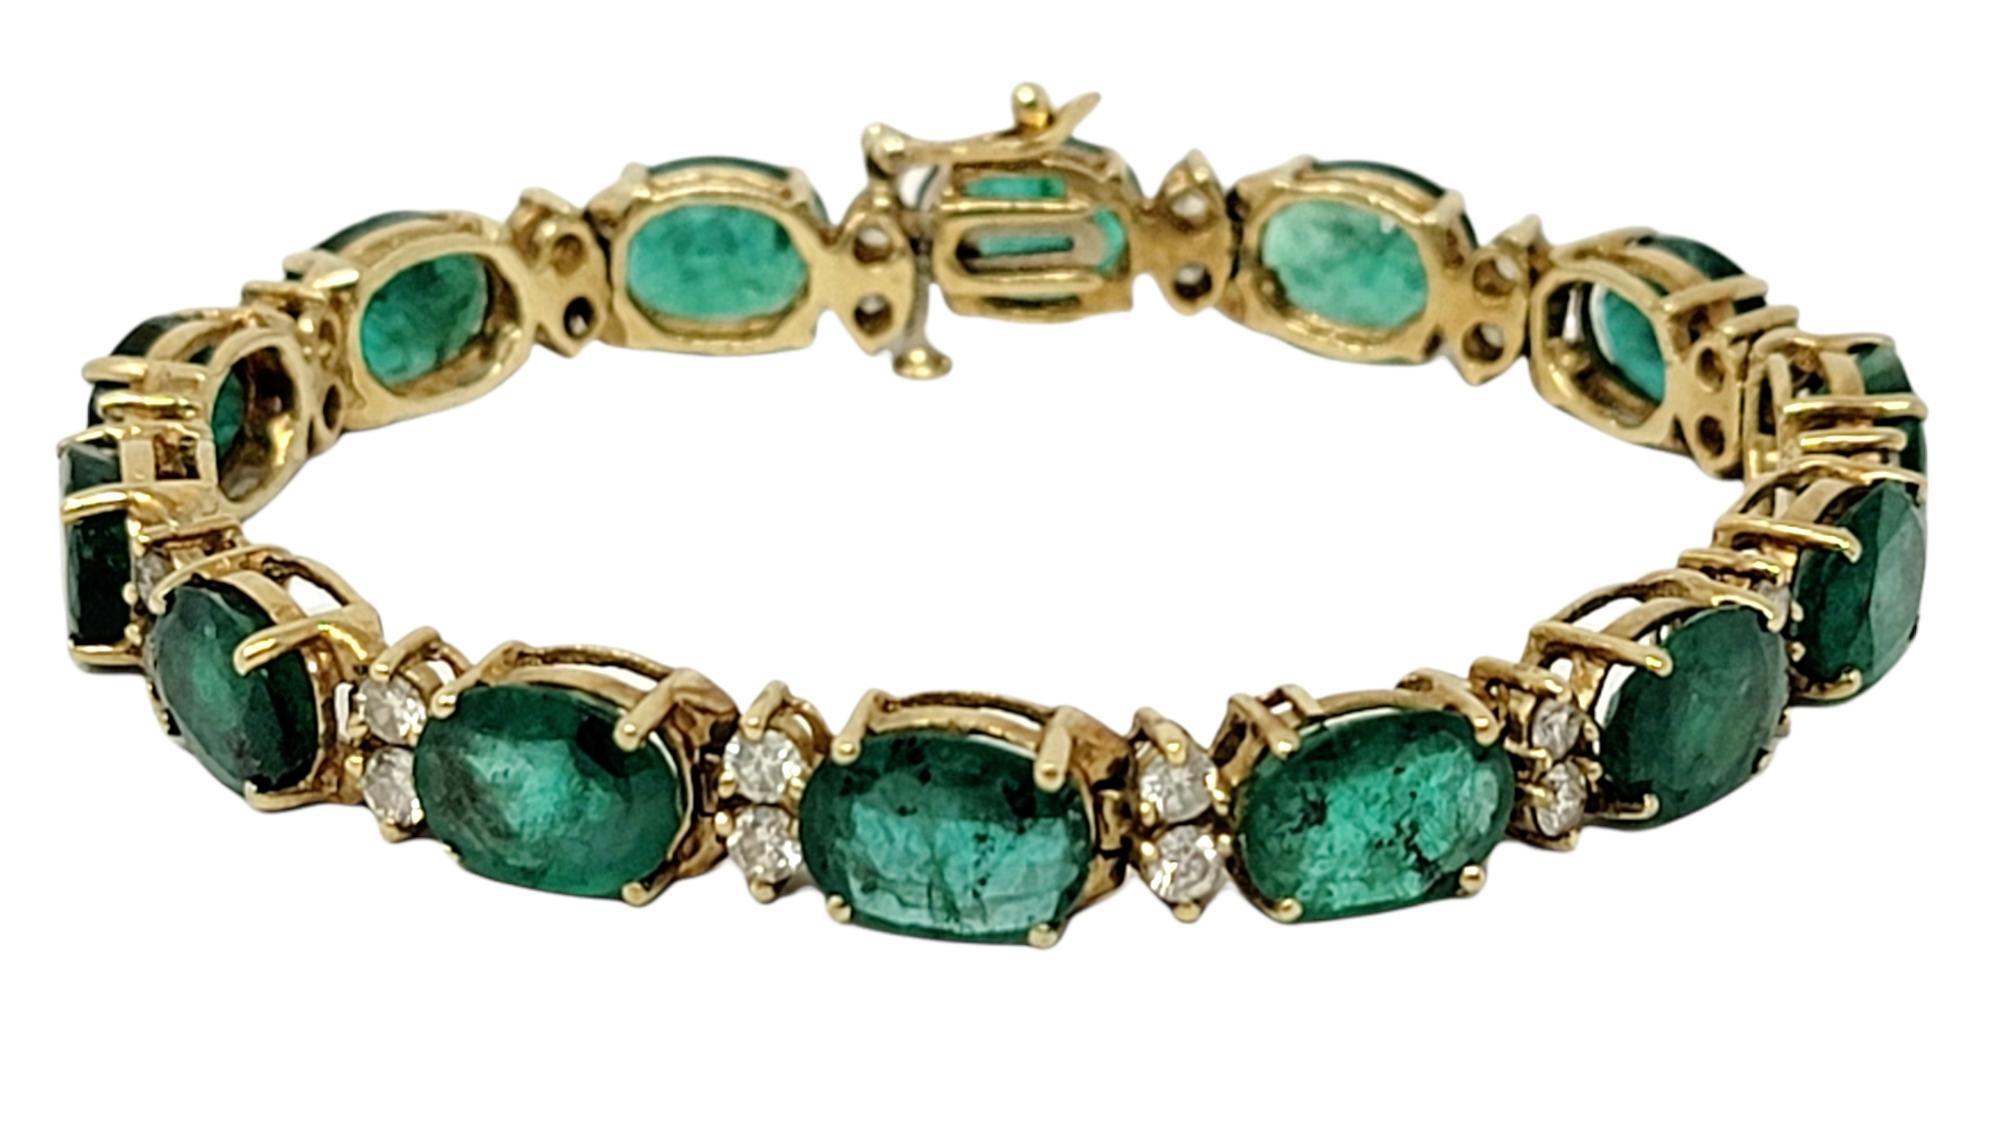 Breathtaking emerald and diamond line bracelet in 14 karat yellow gold. This absolutely gorgeous bracelet features an impressive 18.00 carats total of sparkling natural emerald stones, bright green in color. The 14 sizeable oval mixed cut stones are